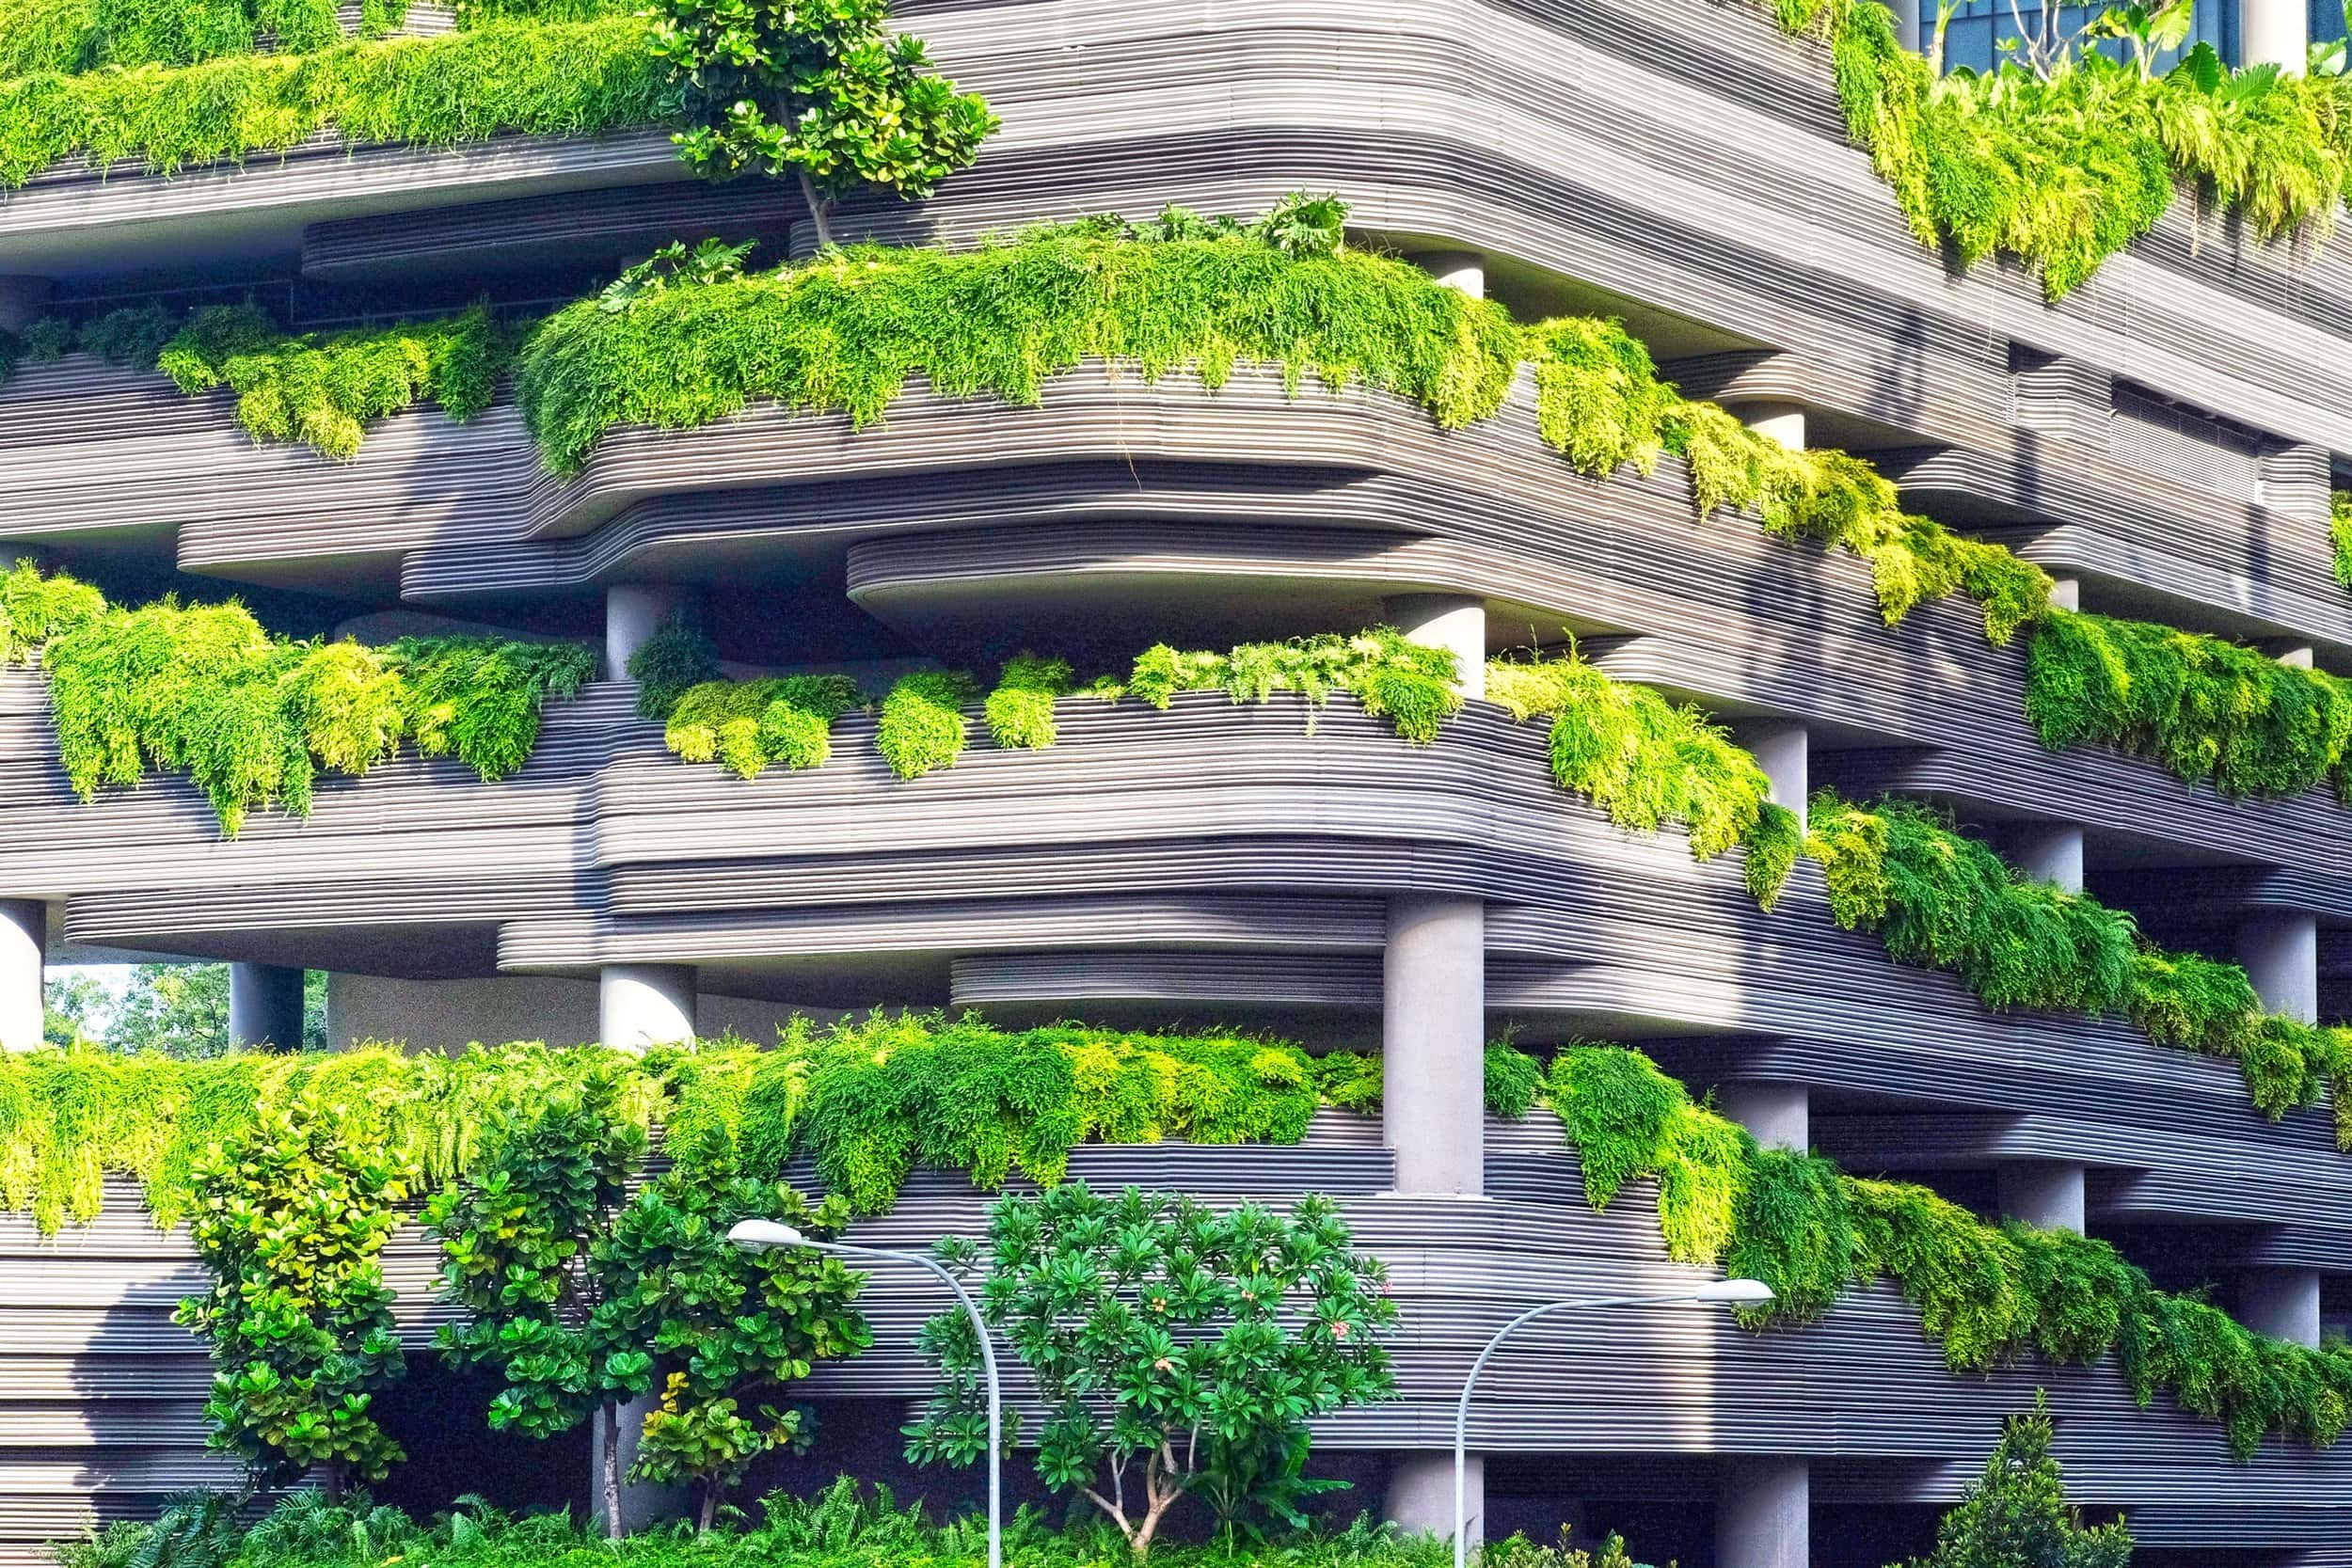 Building with cascading green plants on the sides